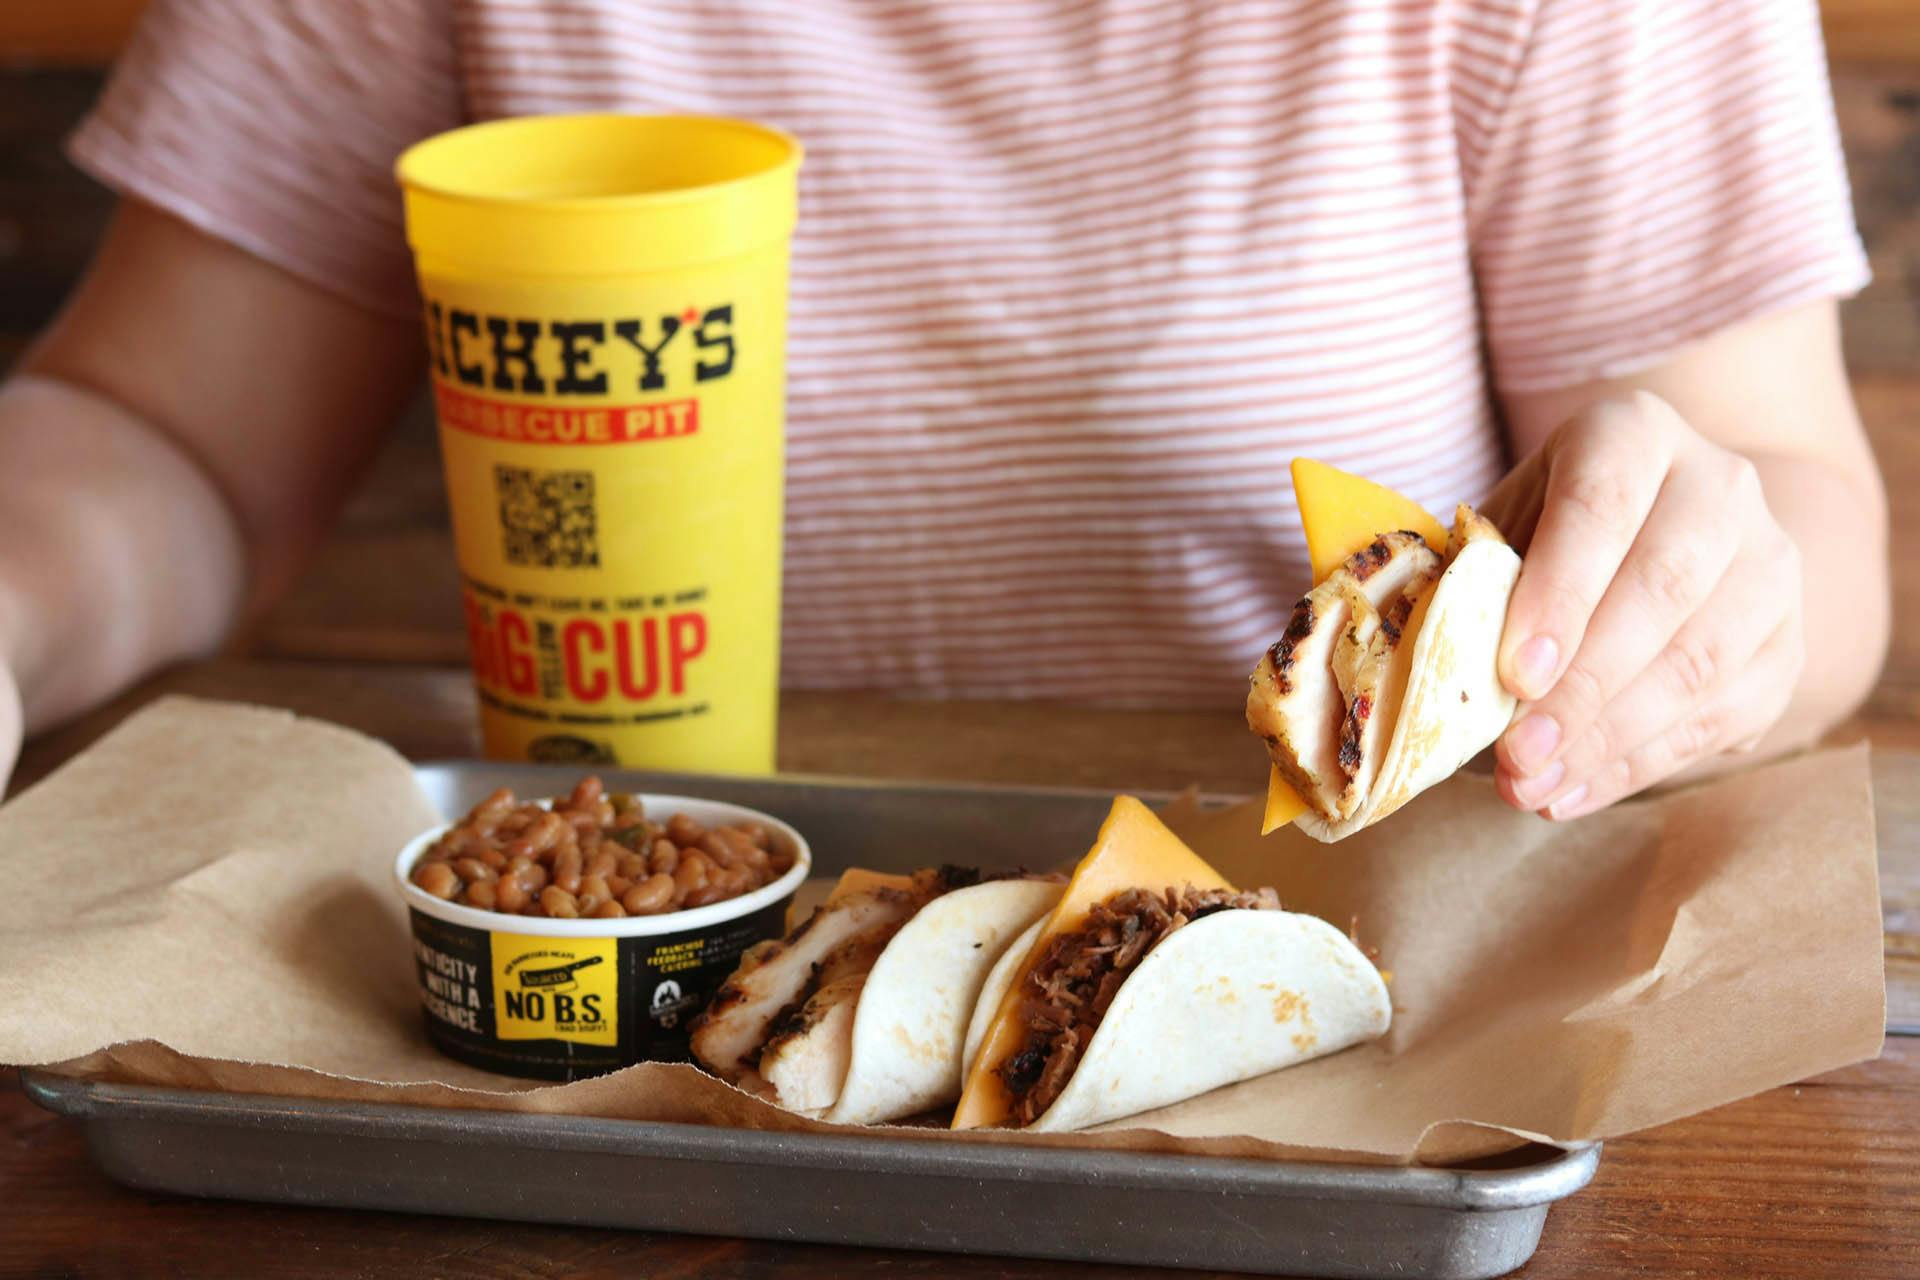 Couple Takes on New Endeavor Opening Dickey’s Barbecue Pit in Hillsboro